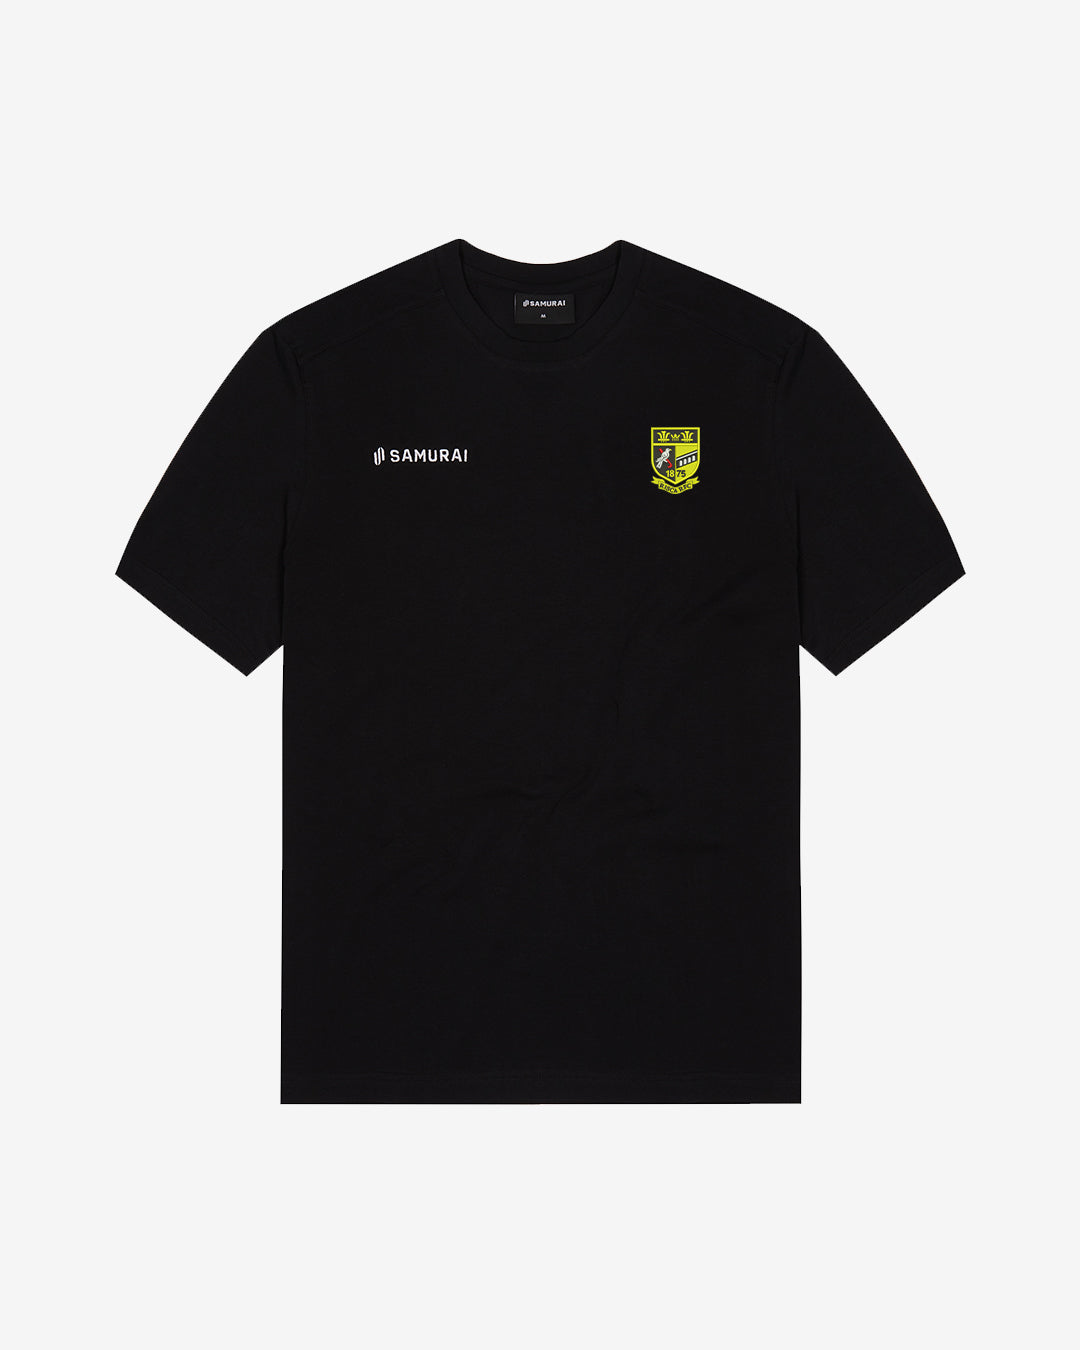 Risca RFC - EP:0110 - Cotton Touch Tee - Black